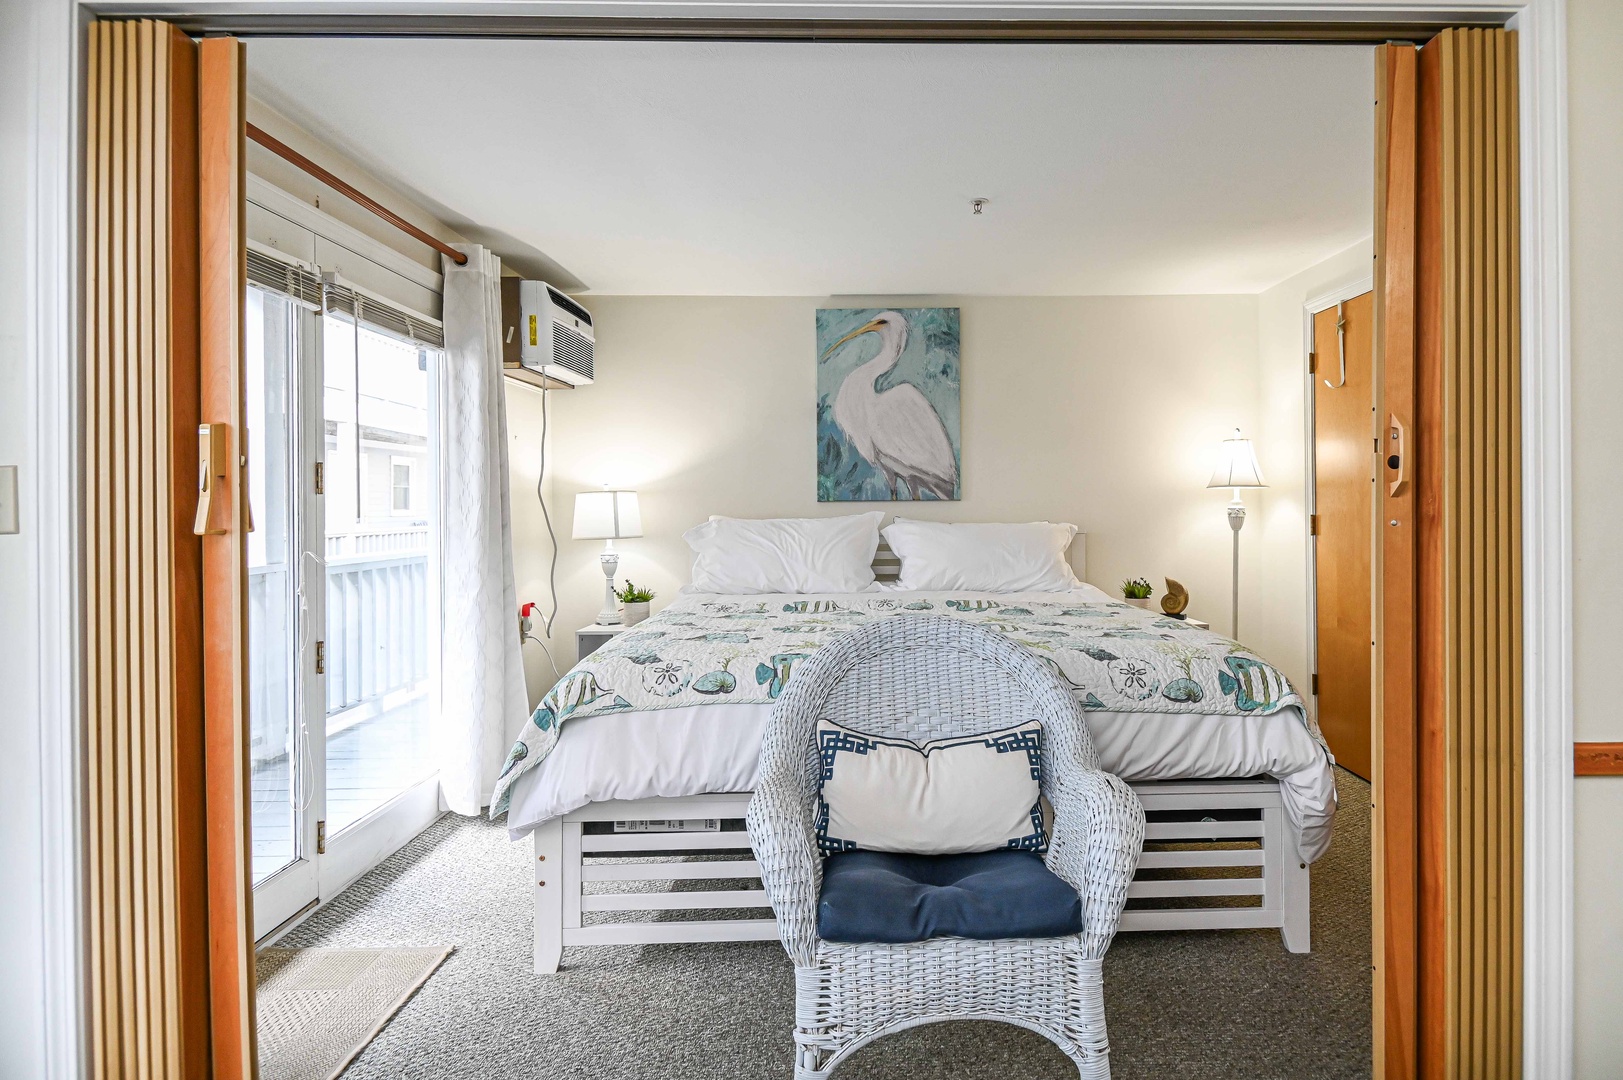 The spacious, coastal bedroom features a plush king-sized bed